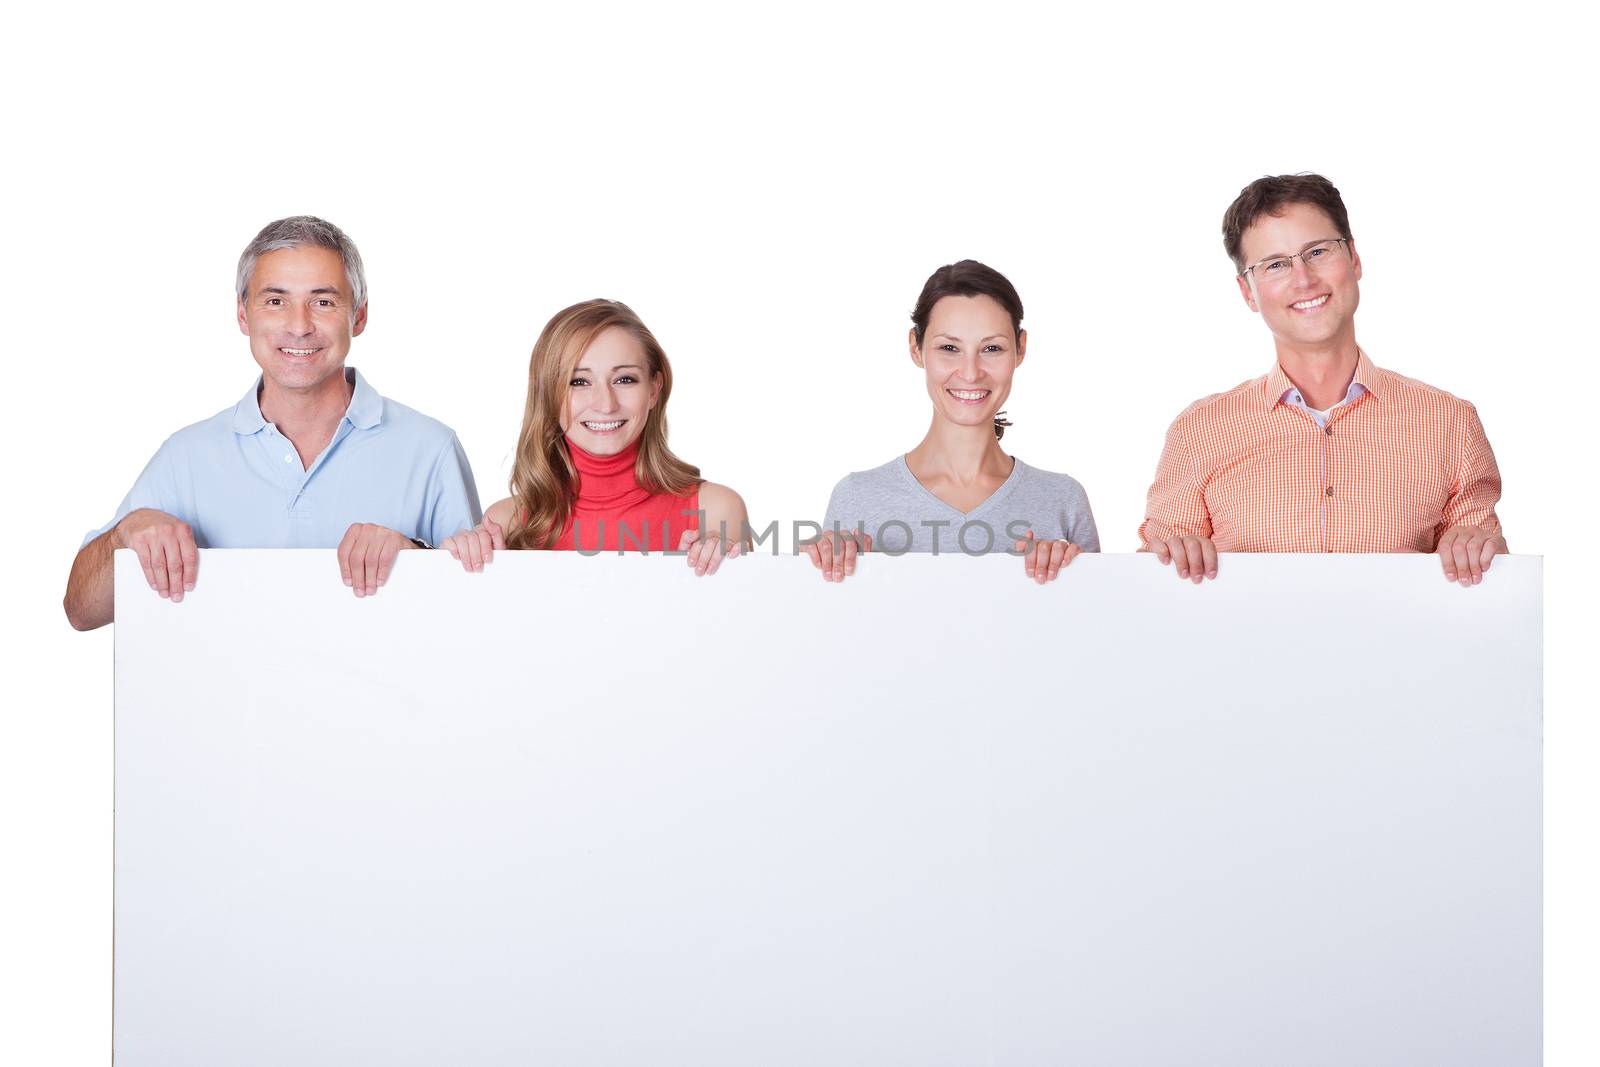 Two happy attractive middle-aged couples in casual clothing holding up a blank horizontal board or banner isolated on white